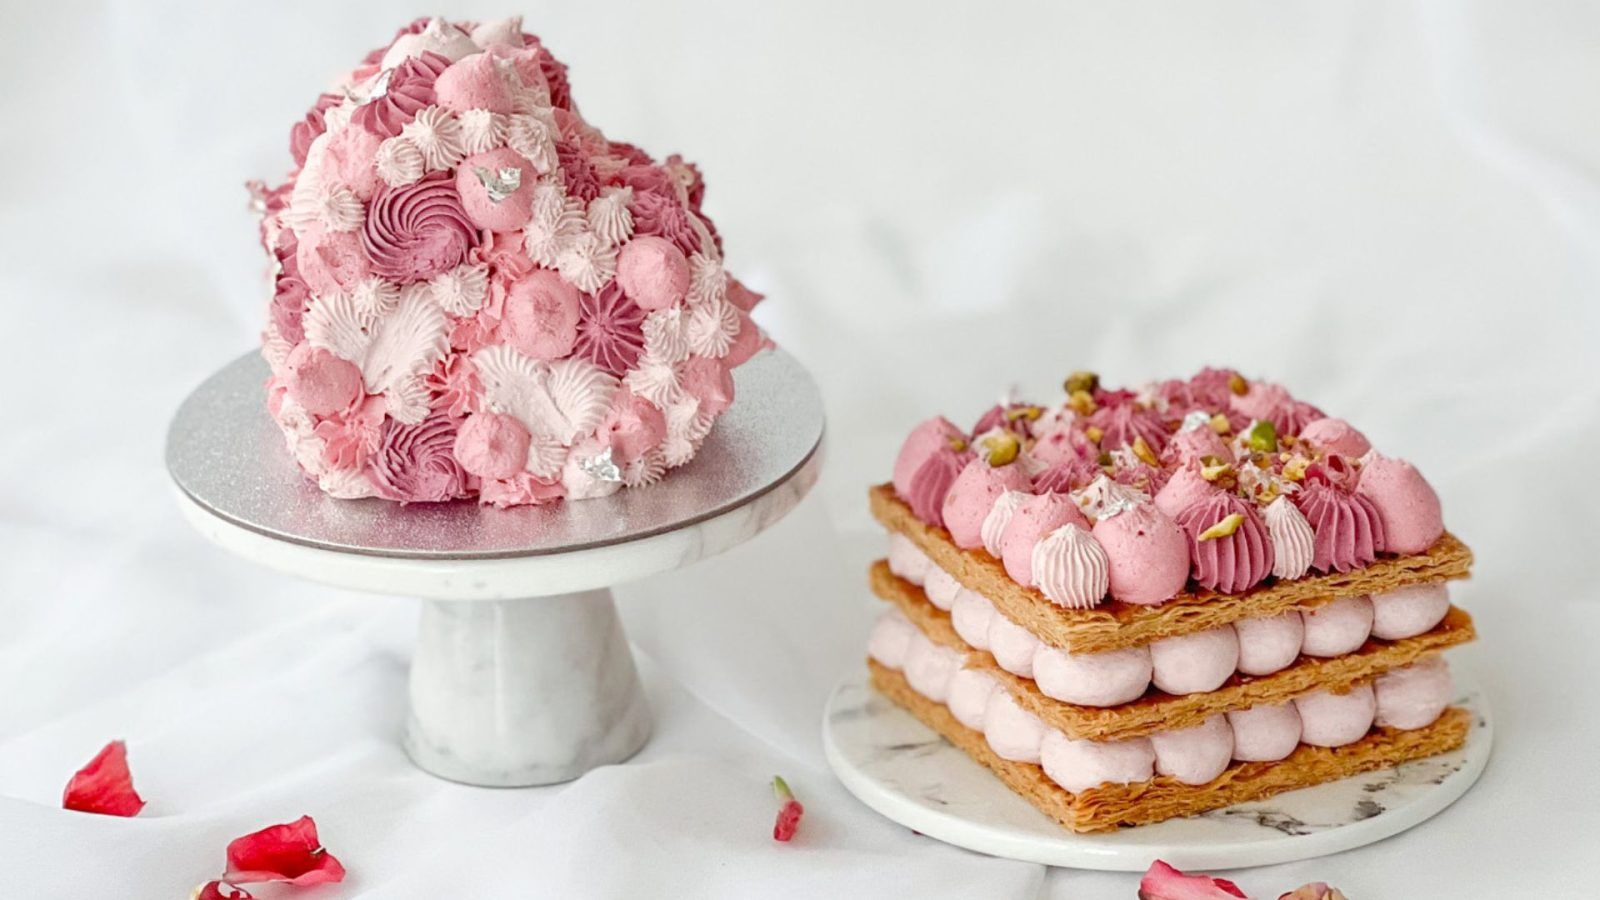 10 Best Cake Shops In Singapore With Delivery – Get LANA CAKES, Goodwood  Park Hotel, Henri Charpentier Cakes Delivered To Home - DanielFoodDiary.com